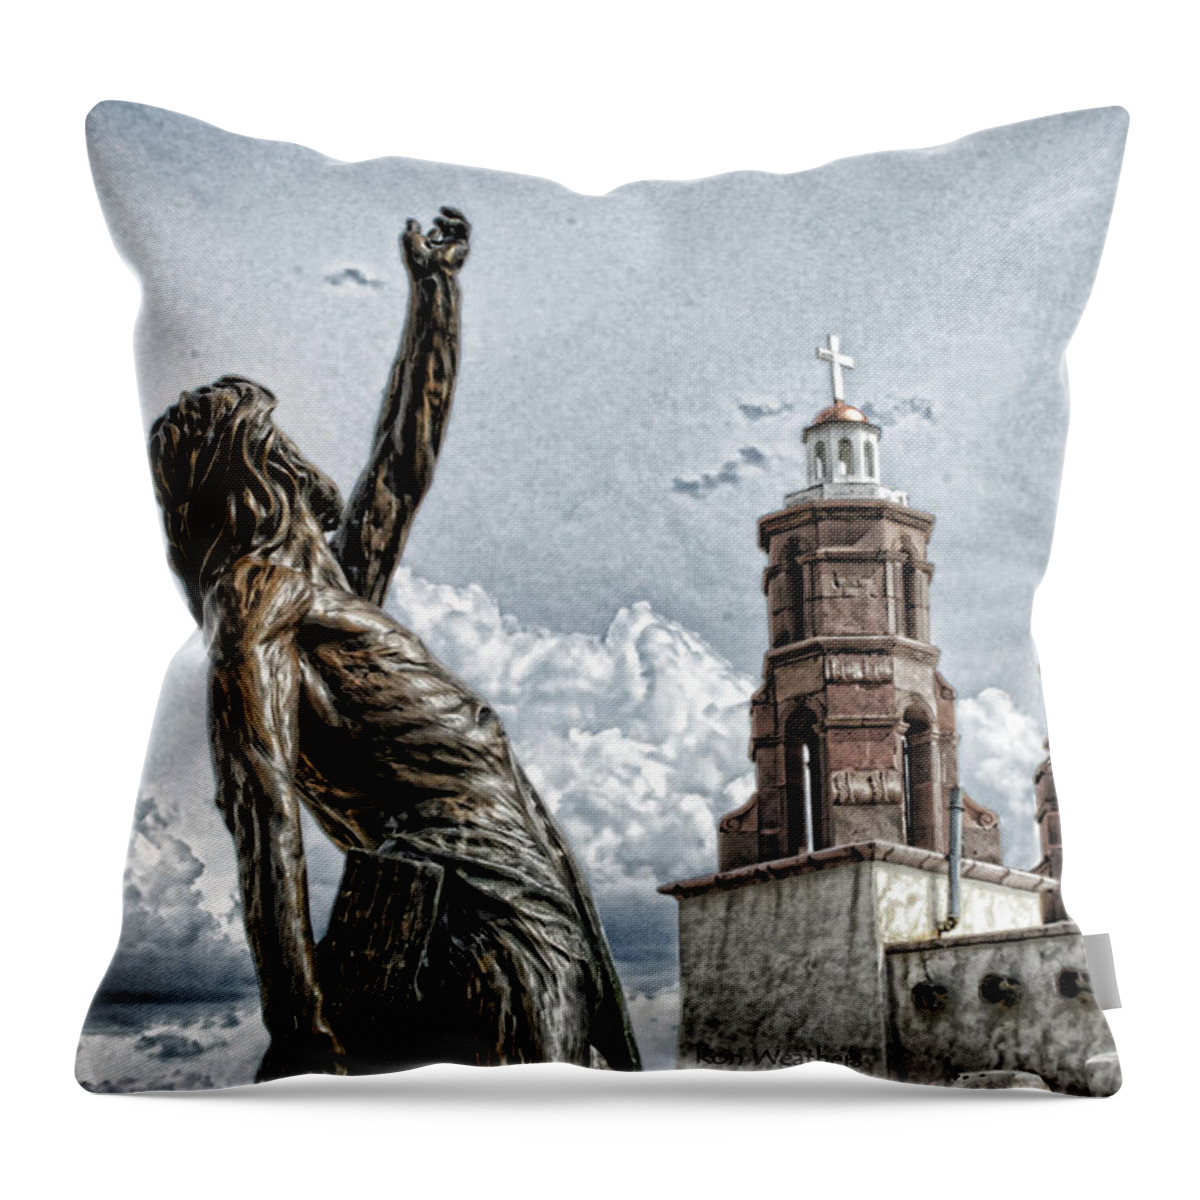 San Luis Throw Pillow featuring the photograph Mission At San Luis by Ron Weathers